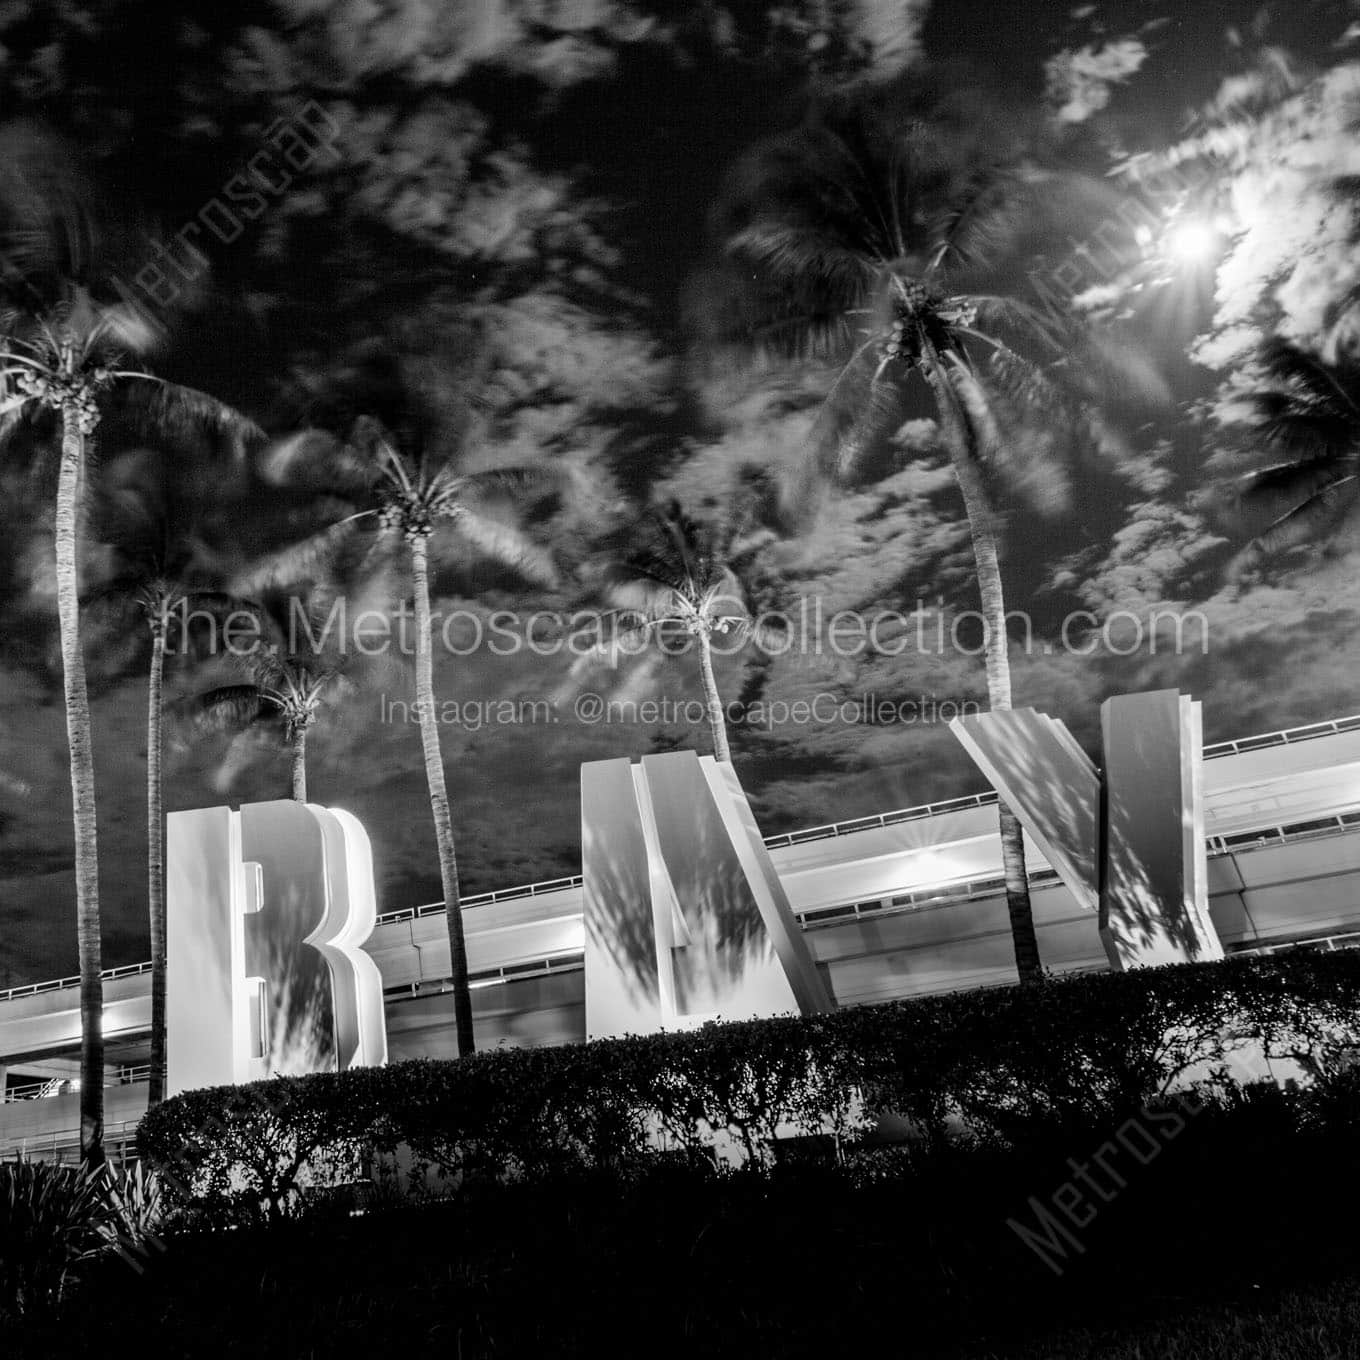 bayside mall sign at night Black & White Office Art